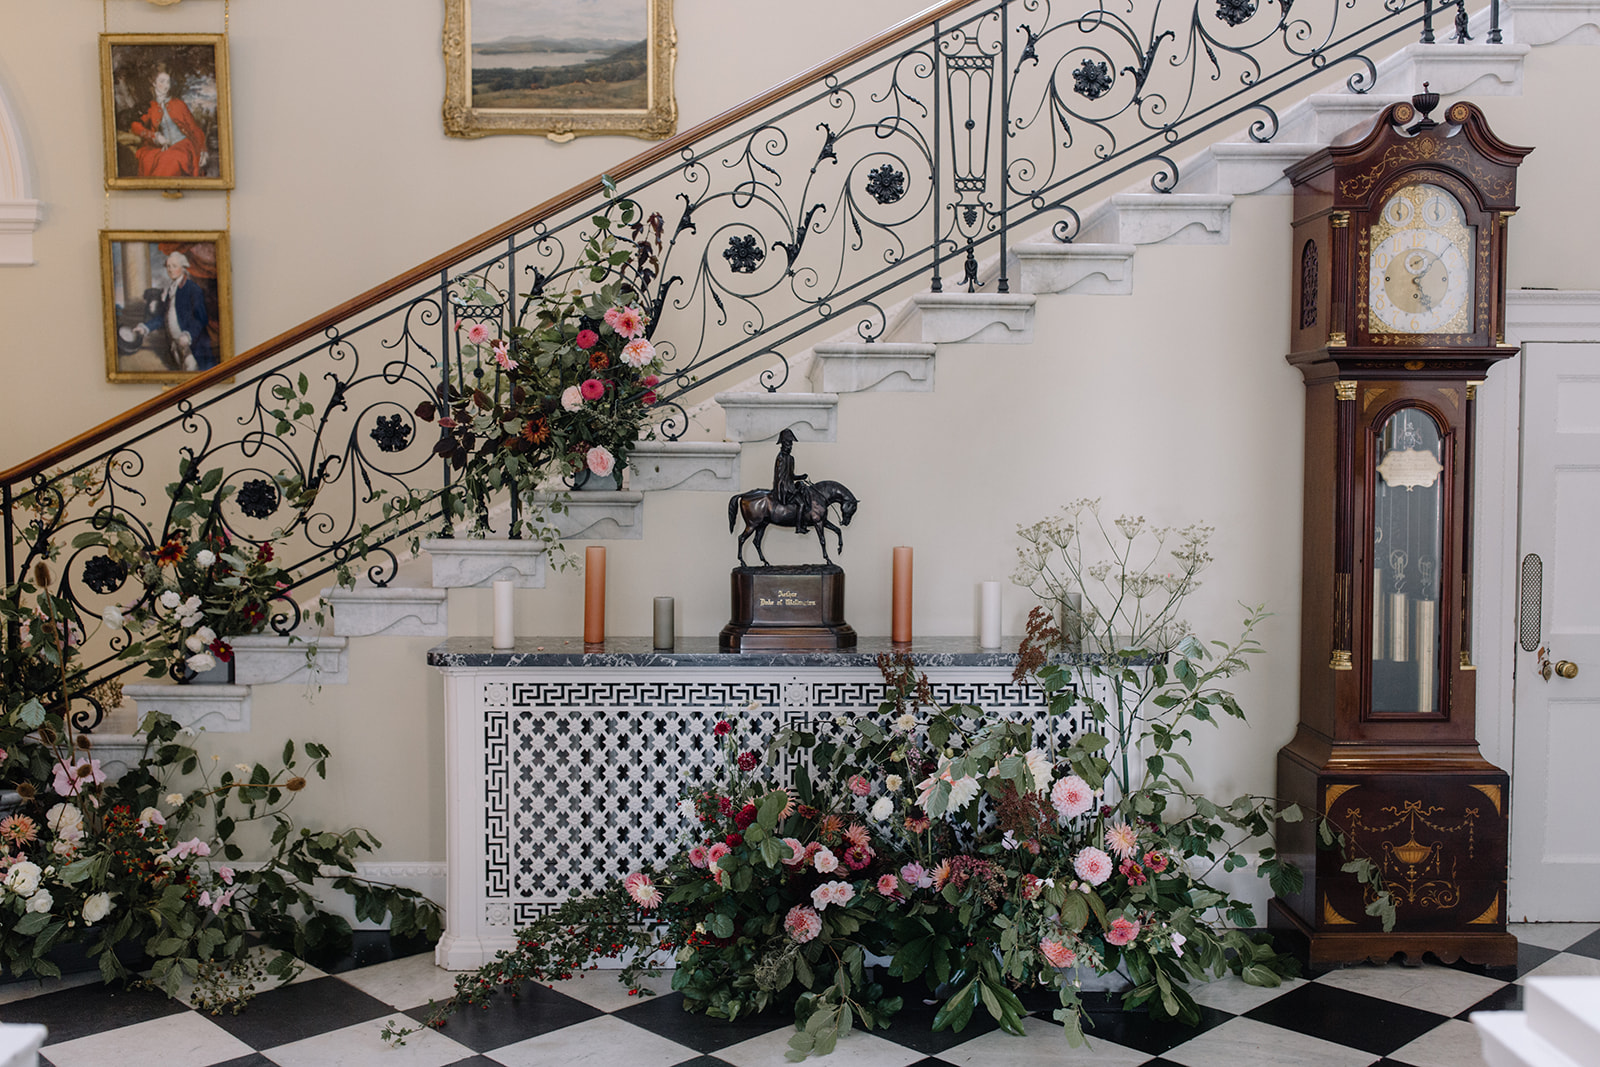 Seasonally Inspired Wedding & Event Flowers by Bride and Bloom. Floral Staircase Installation at Weston Park. Image by Beccy Goddard